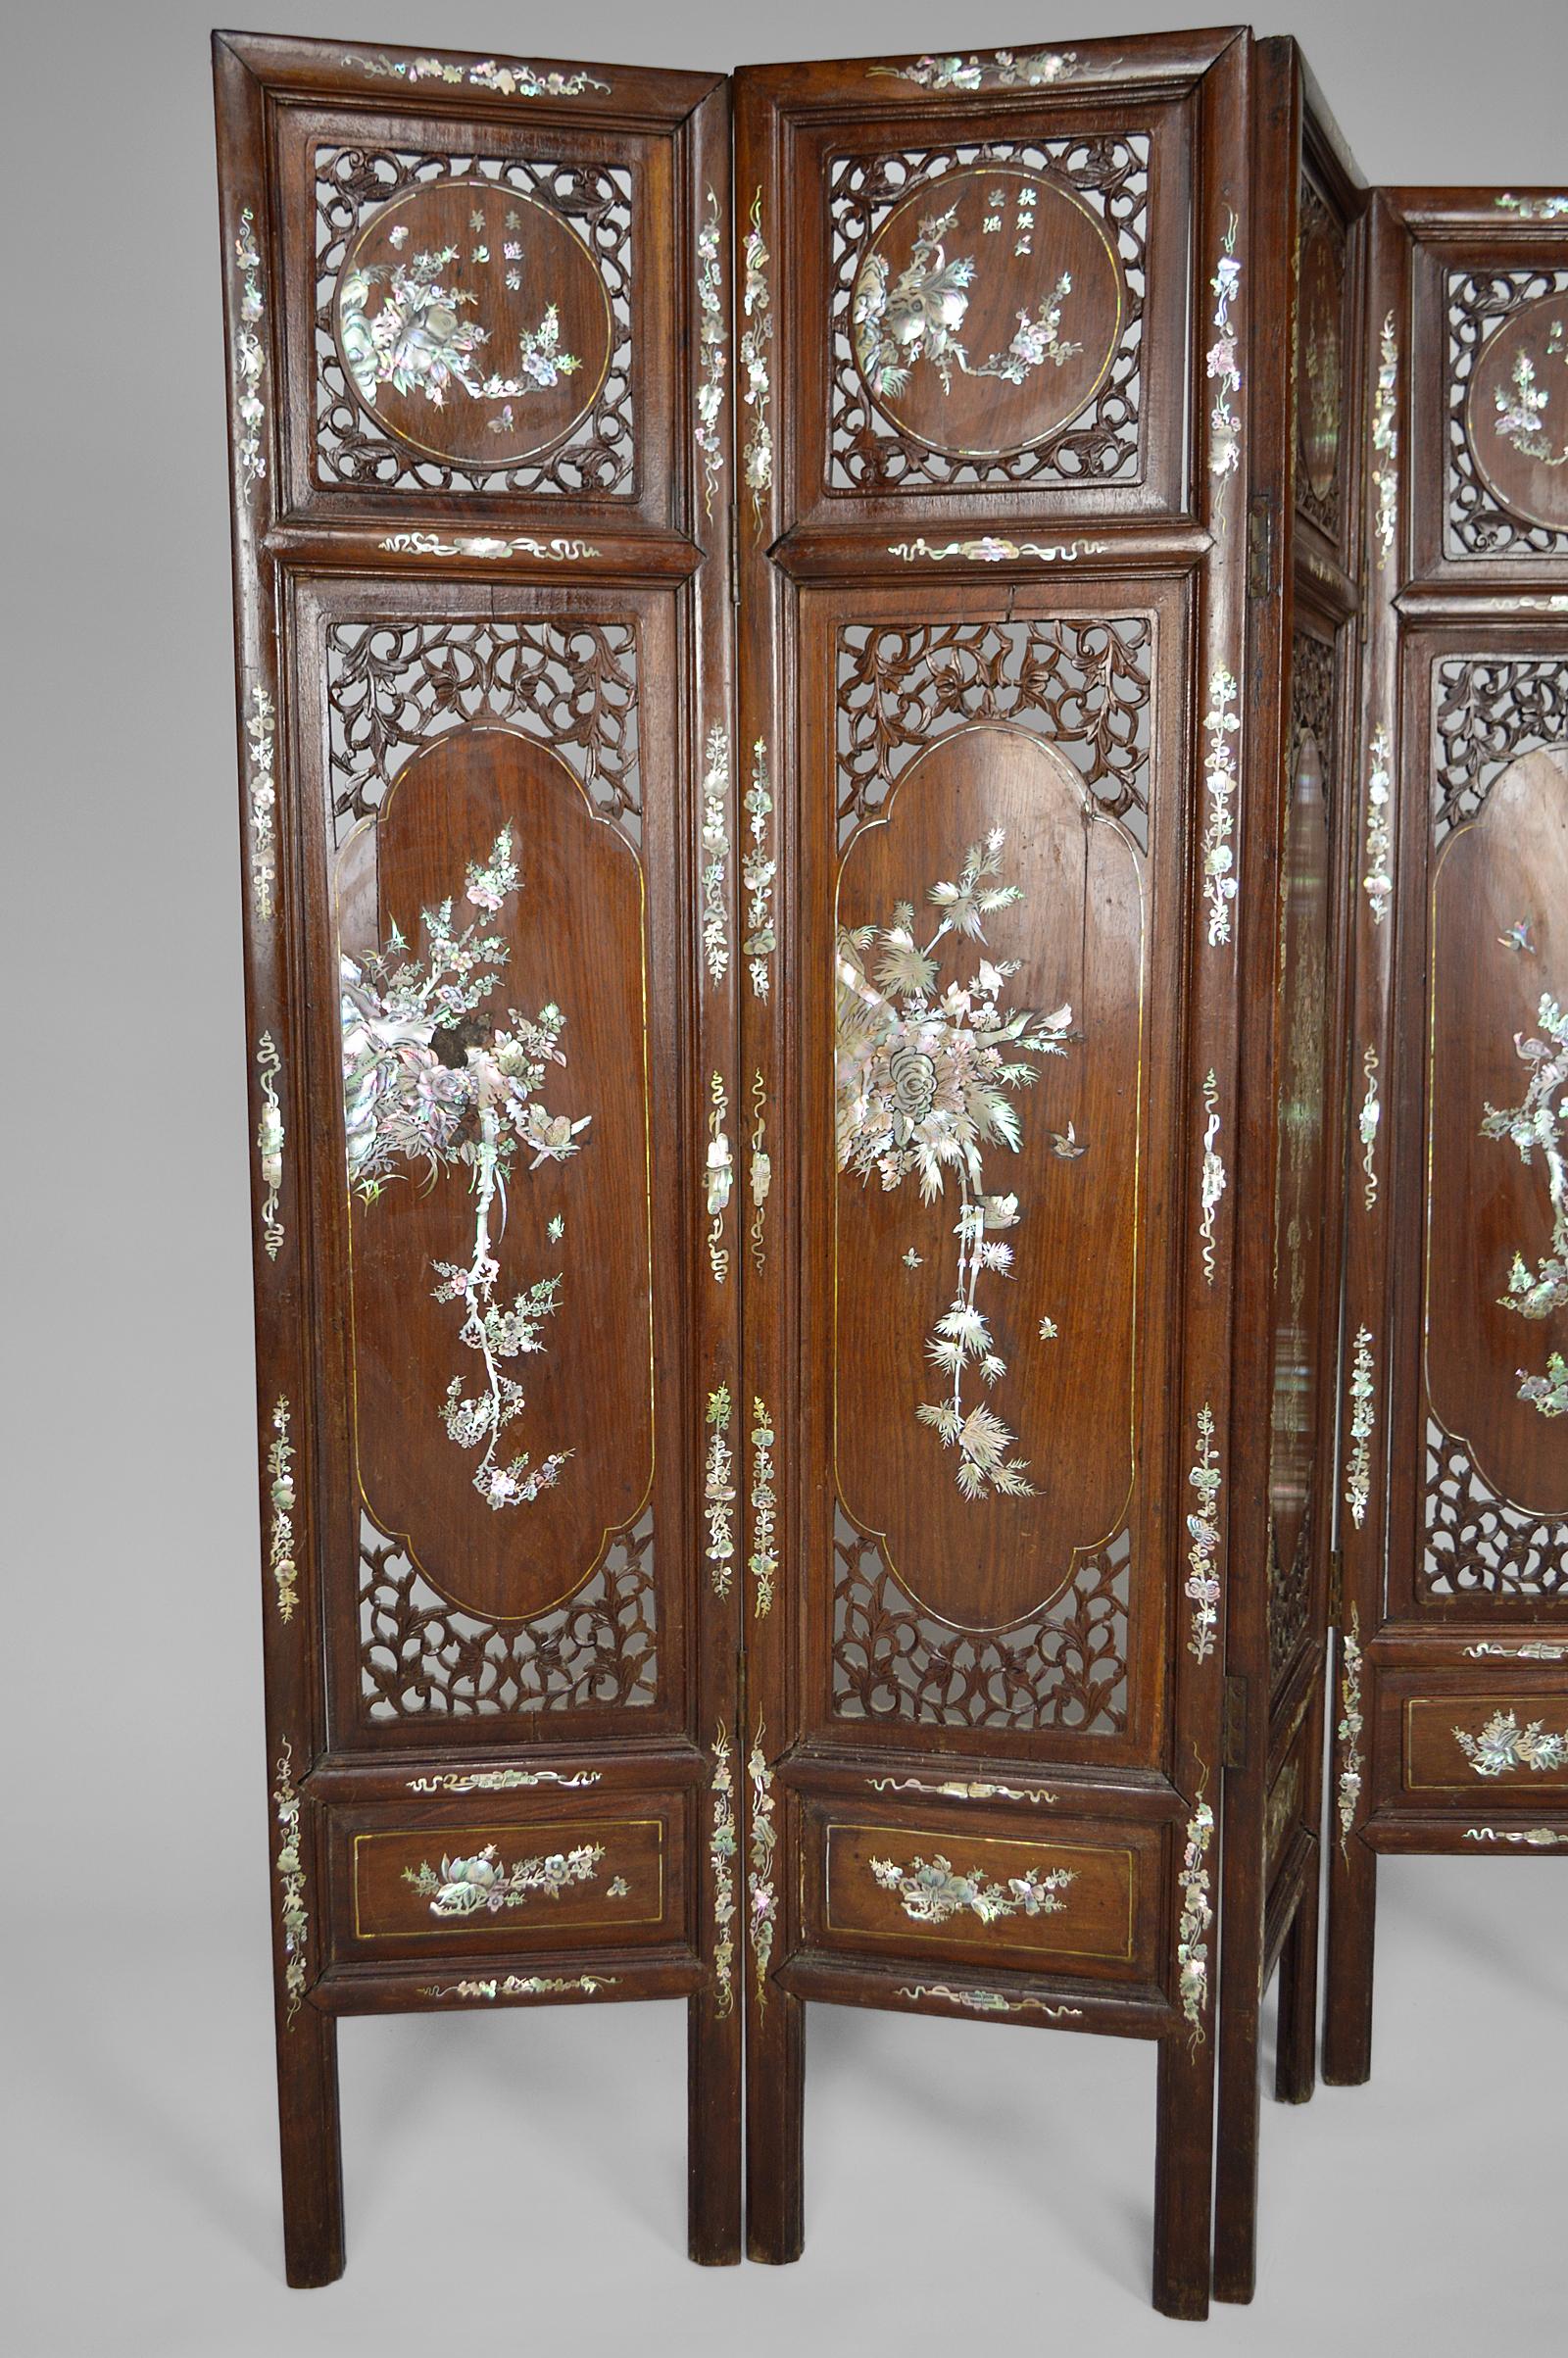 Chinese Export Asian Folding Screen in Carved Wood and Mother-of-Pearl, 19th Century